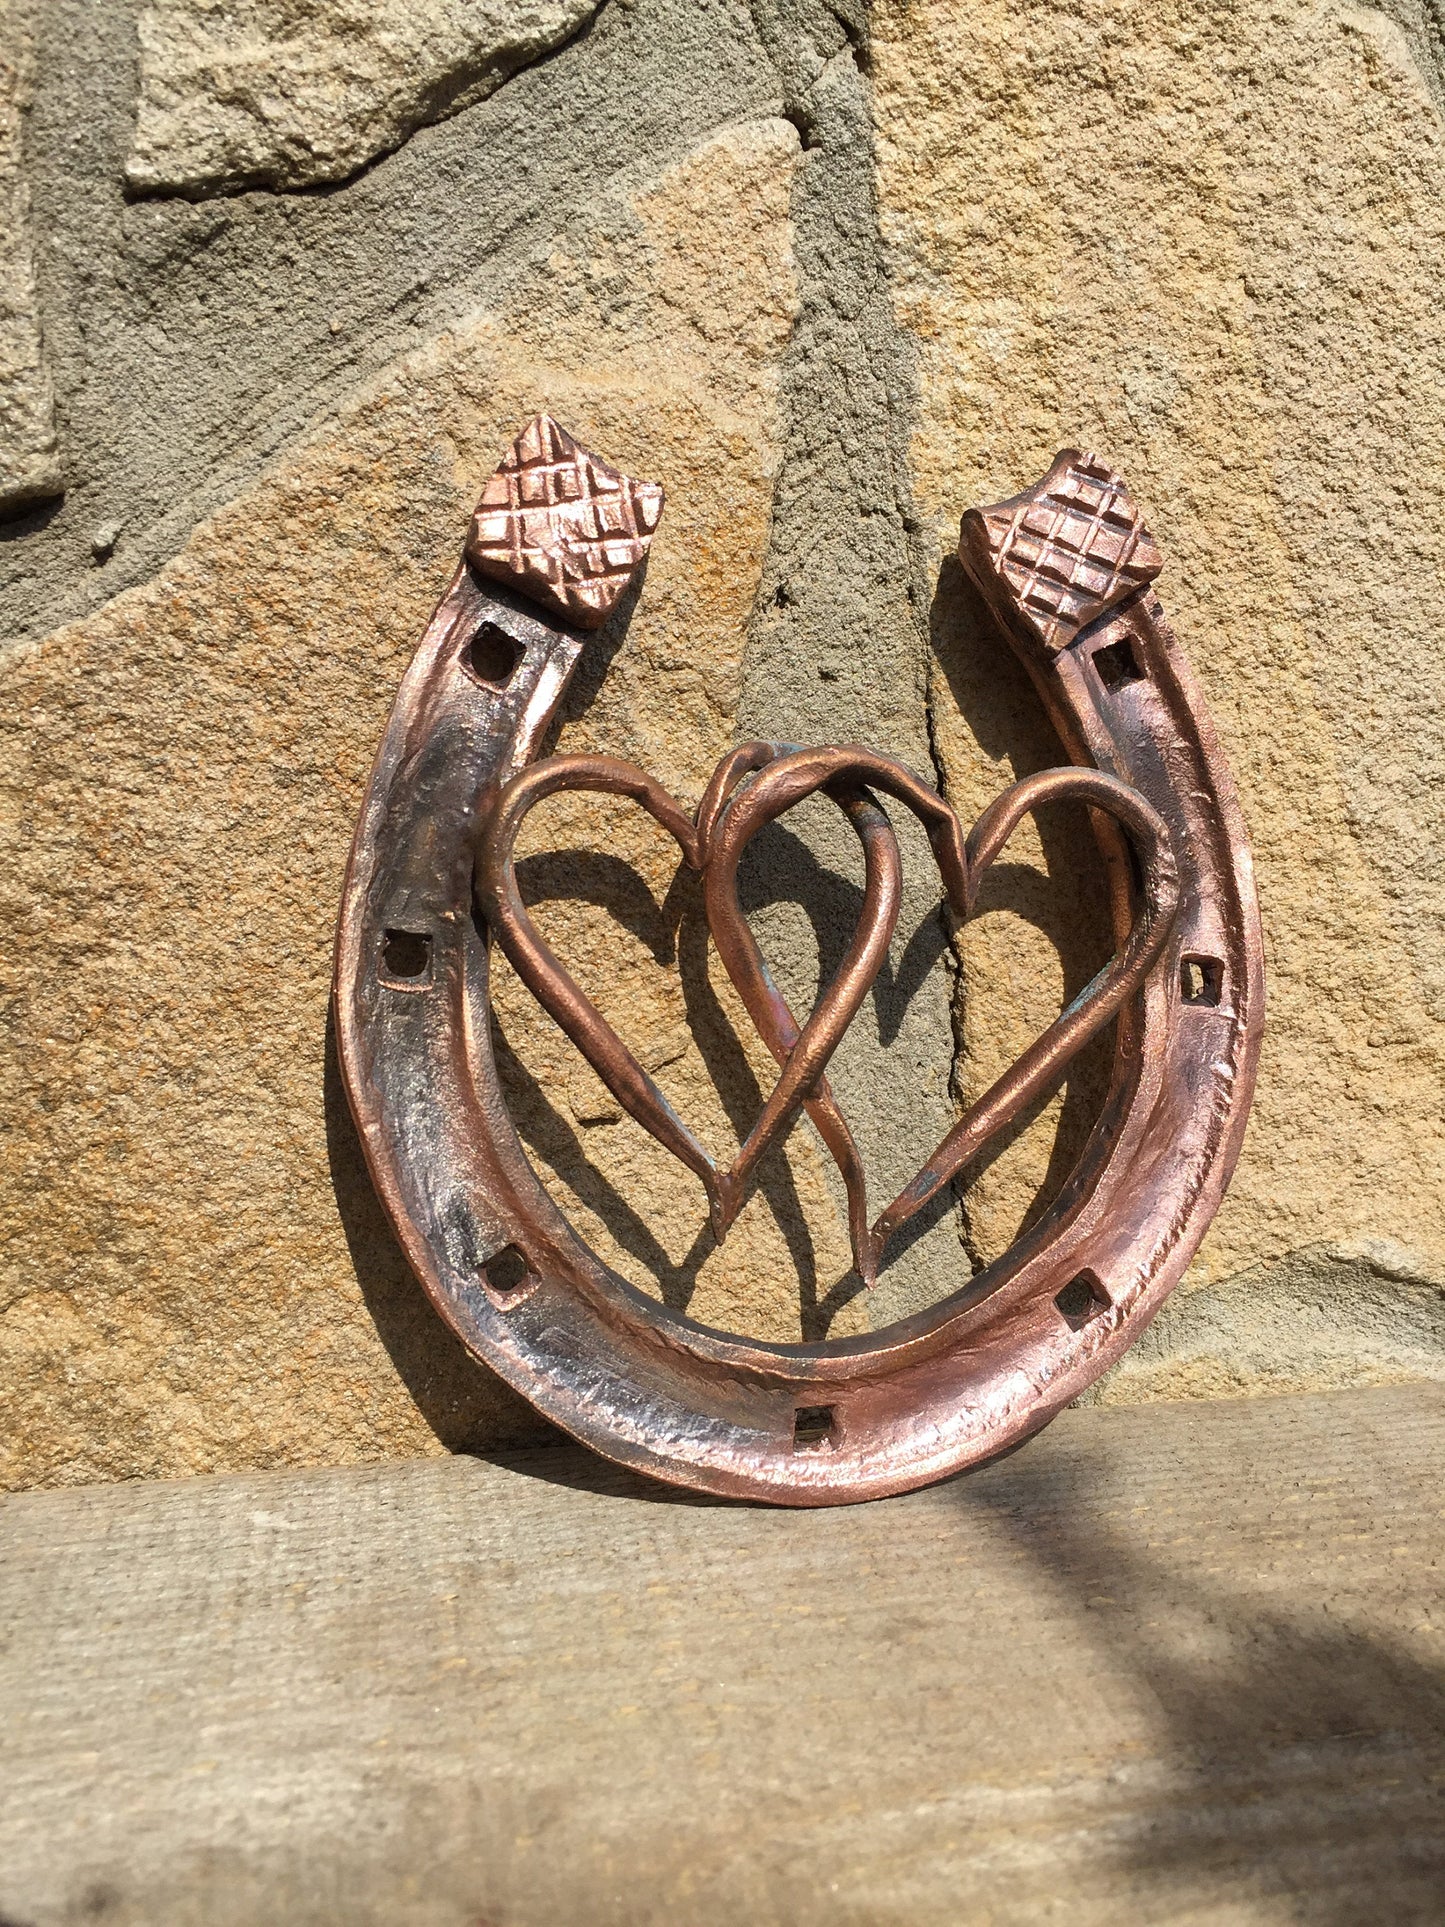 Copper horseshoe, copper gifts, 7 year gifts, 7th anniversary gift, engagement,love talisman,lucky horseshoe,copper anniversary,copper heart